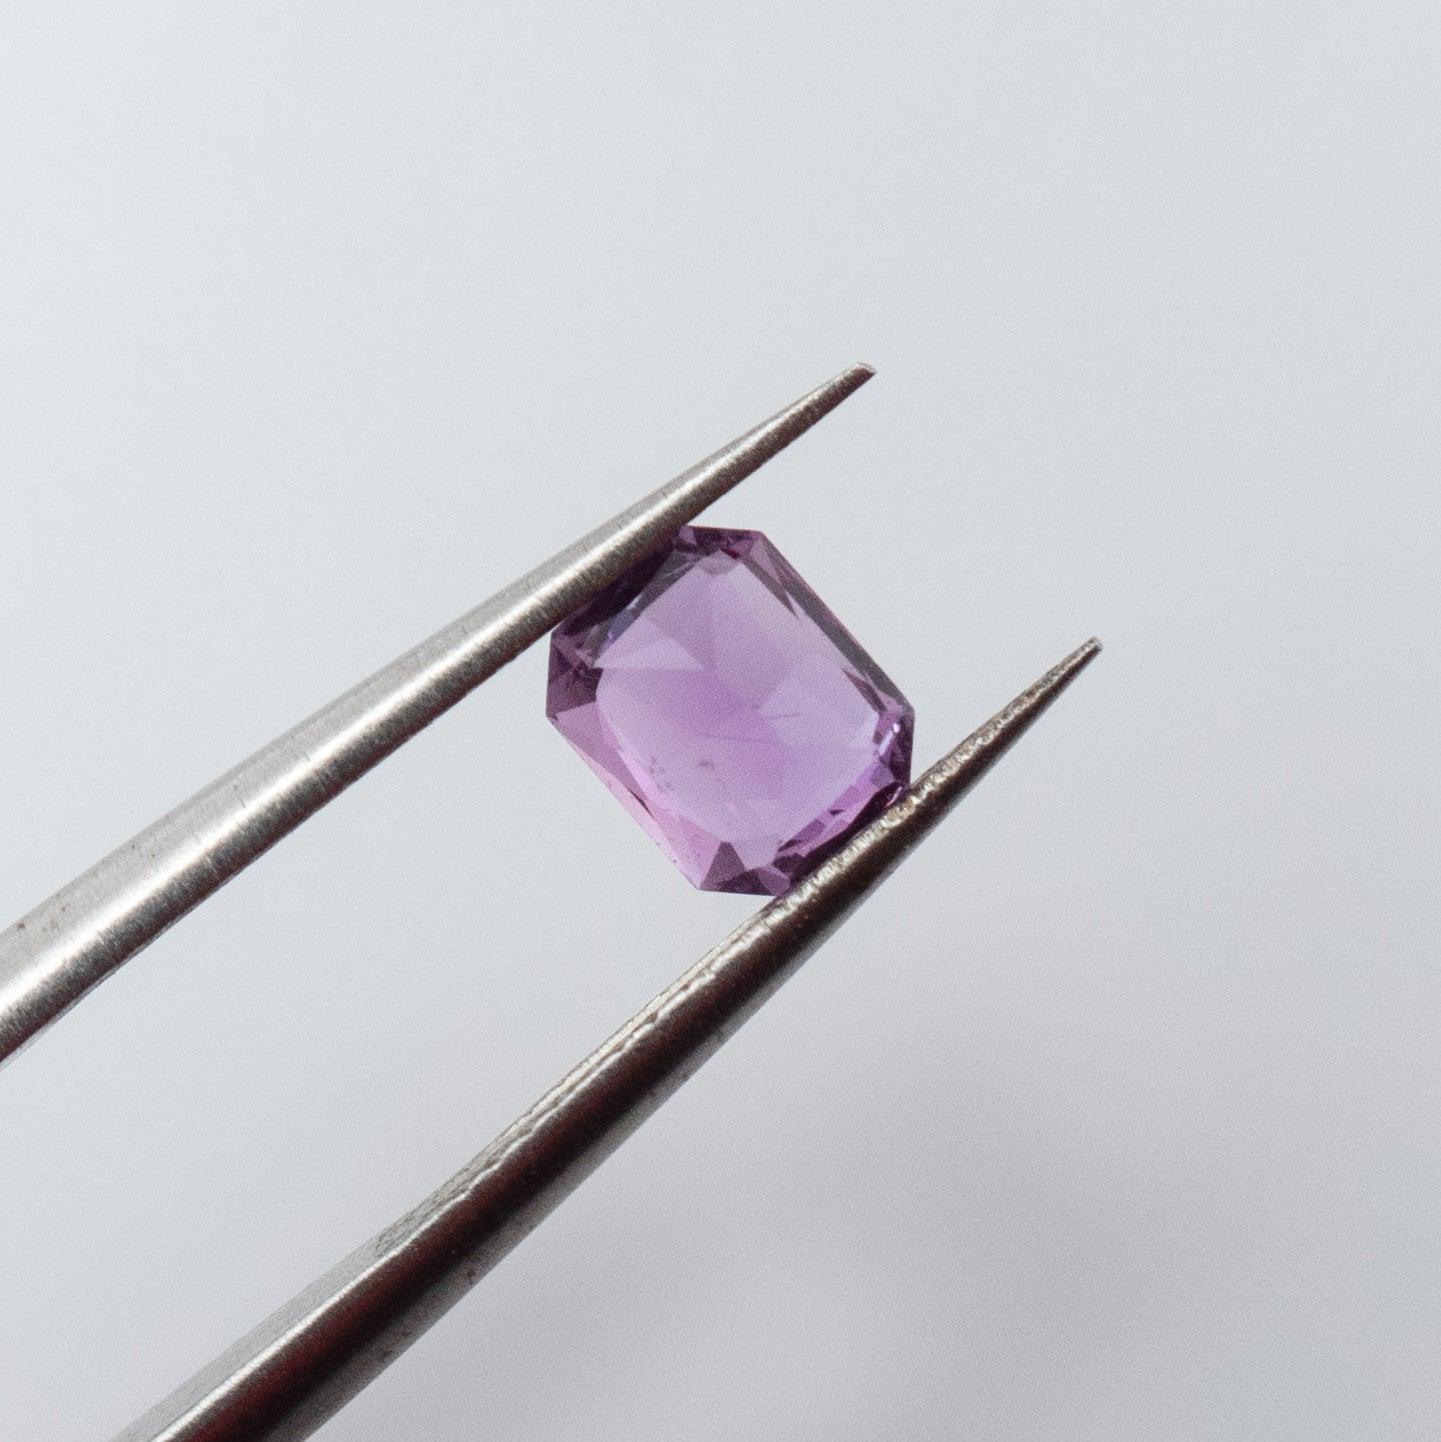 Violet/Purple Sapphire Natural Heated 0.83ct